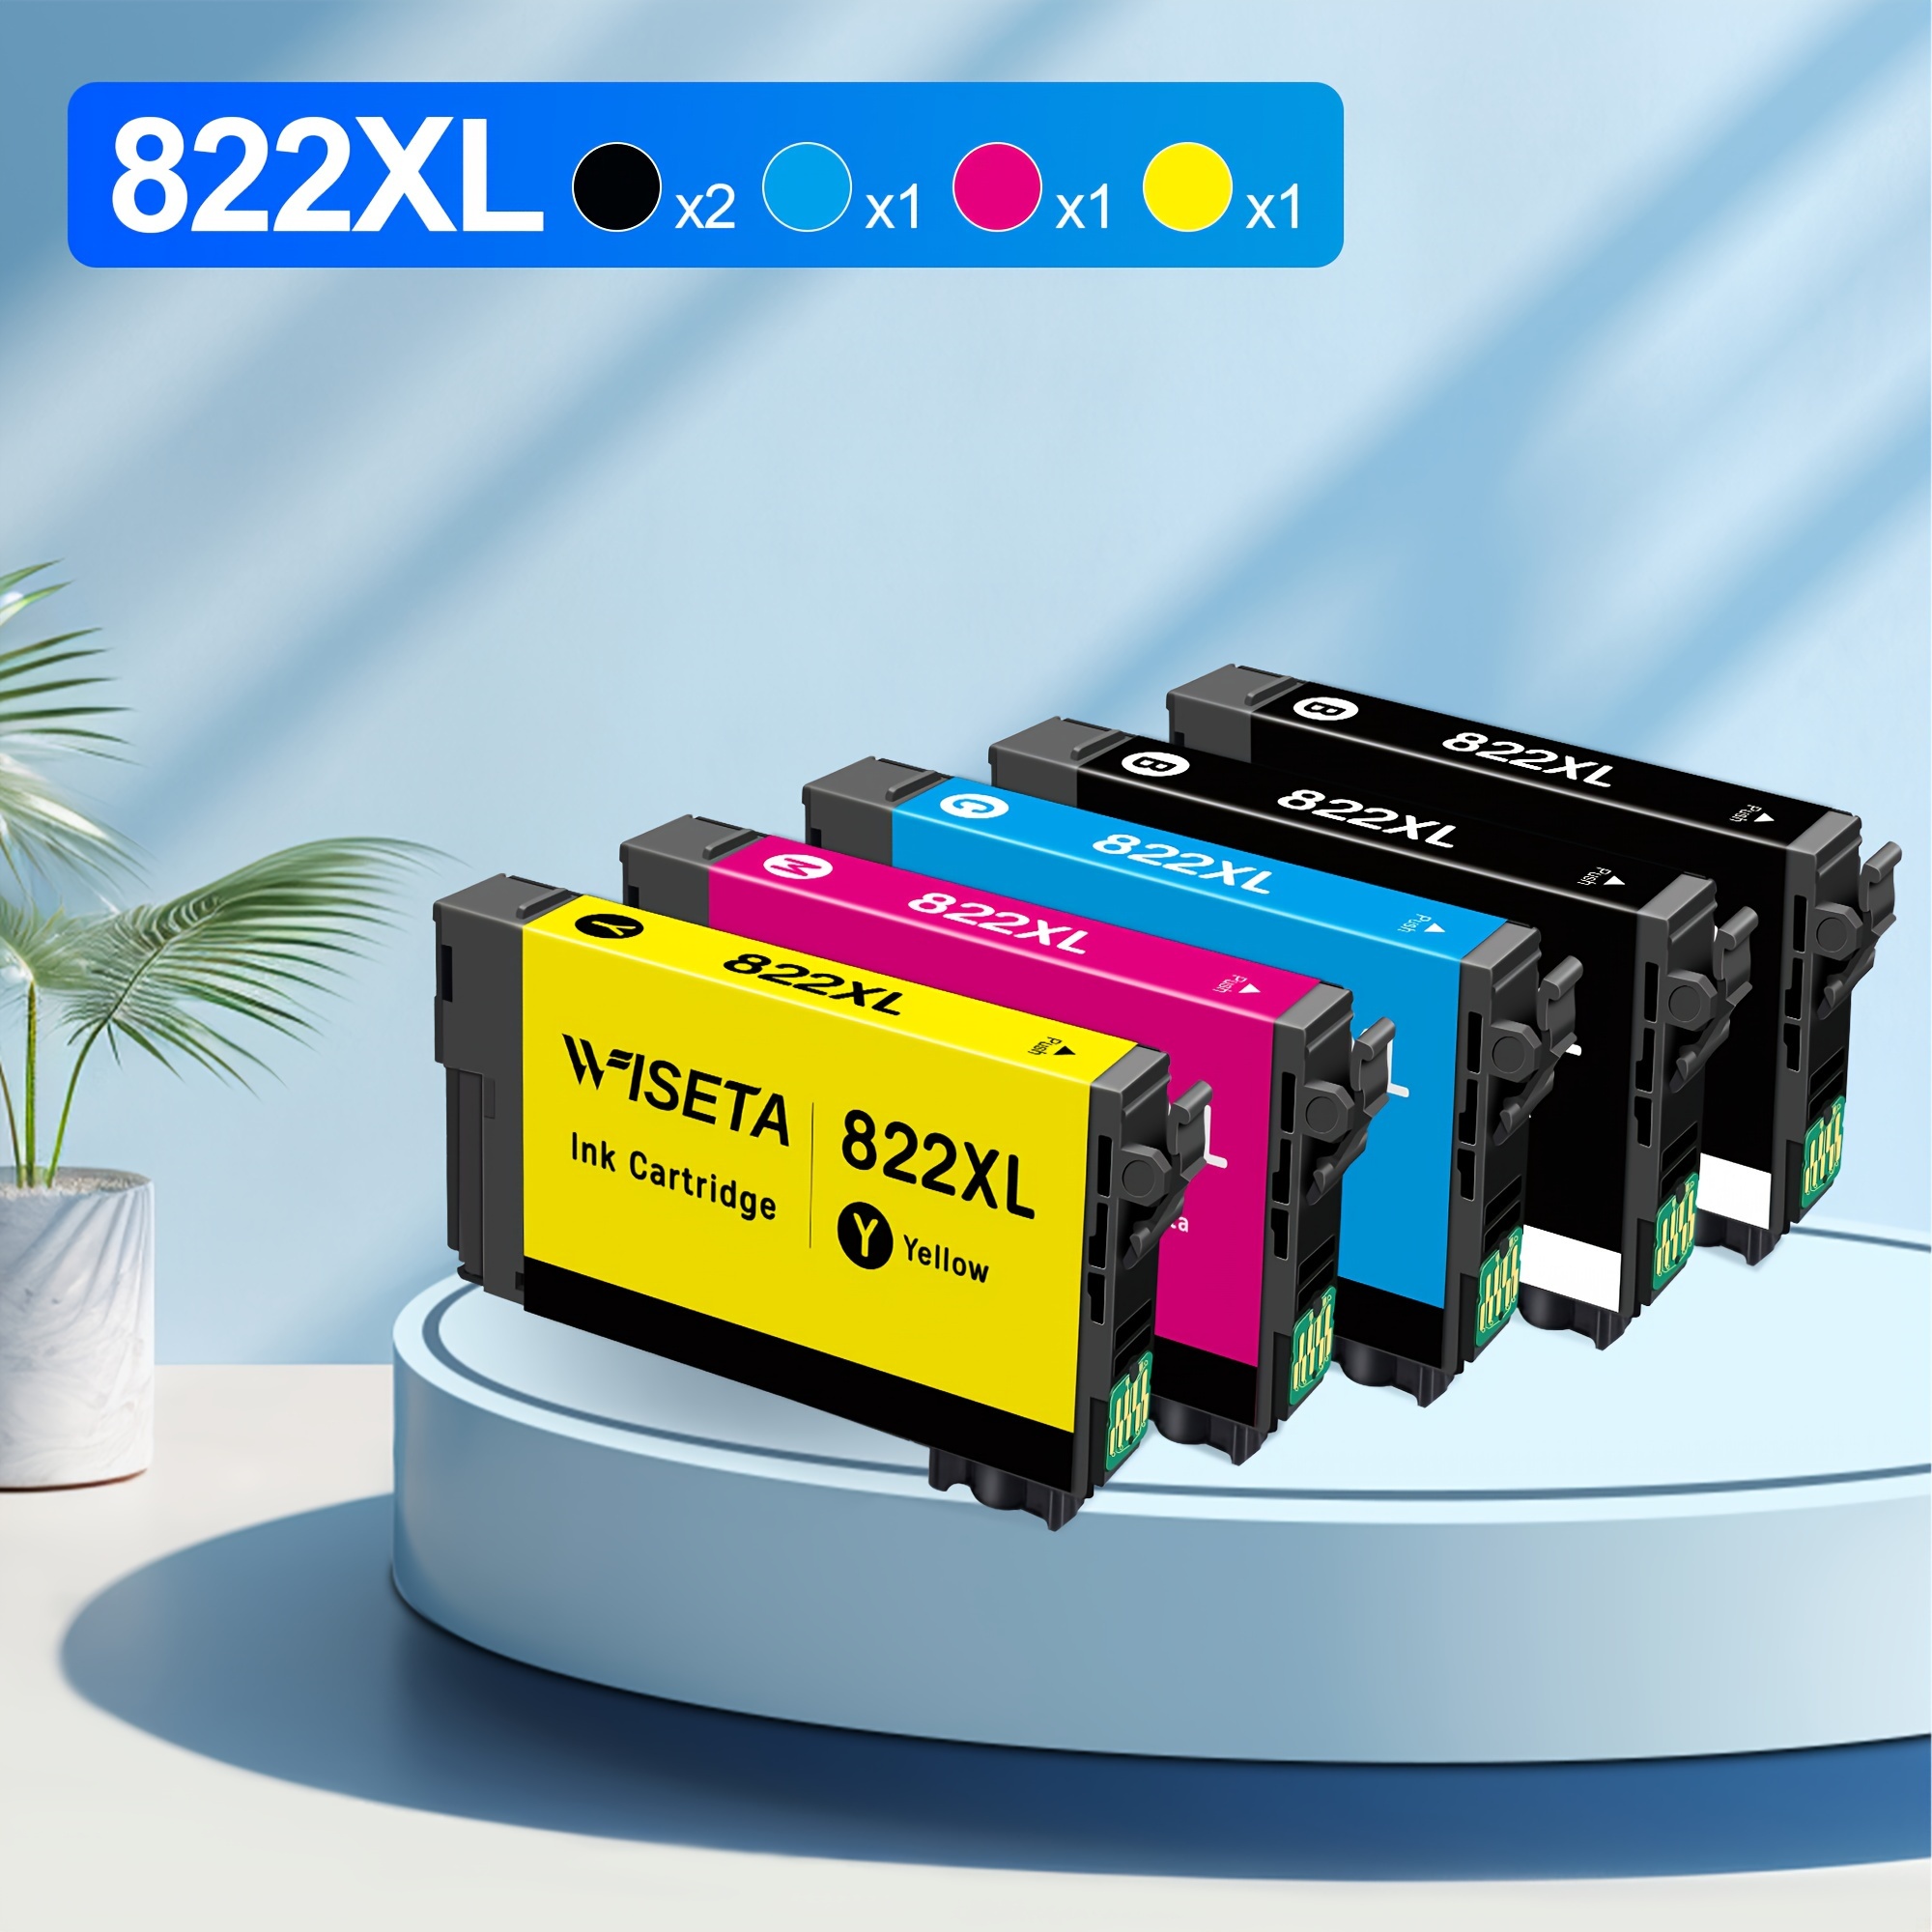 

5 Pack 822xl Printer Ink Remanufactured Replacement For 822xl Ink Cartridges 822 T822xl Printer Ink For Workforce Pro Wf-3820 Wf-4820 Wf-4830 Wf-4833 Wf-4834